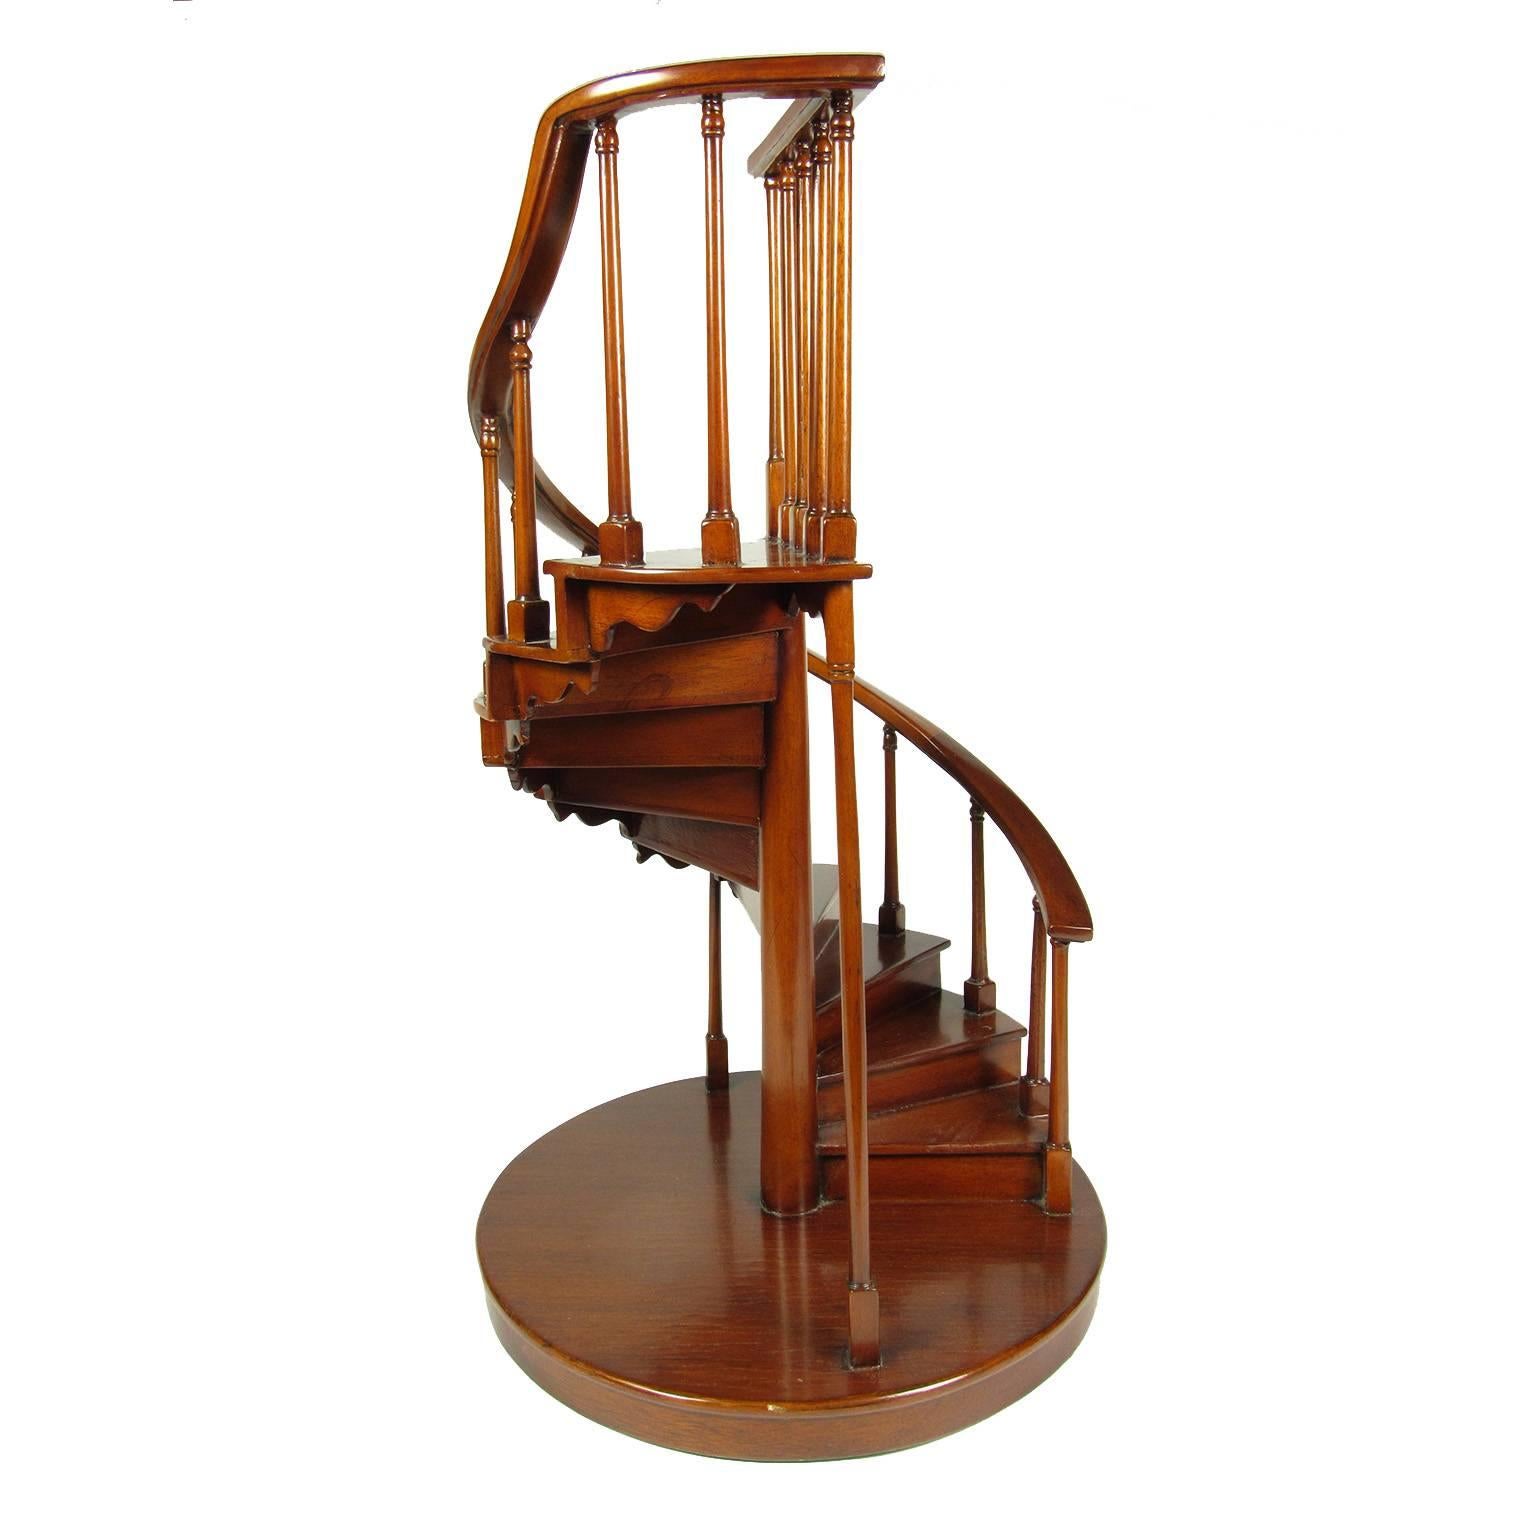 19th century mahogany (or rosewood) spiral staircase model.
Dimensions: 23 3/4 x 14 inches.